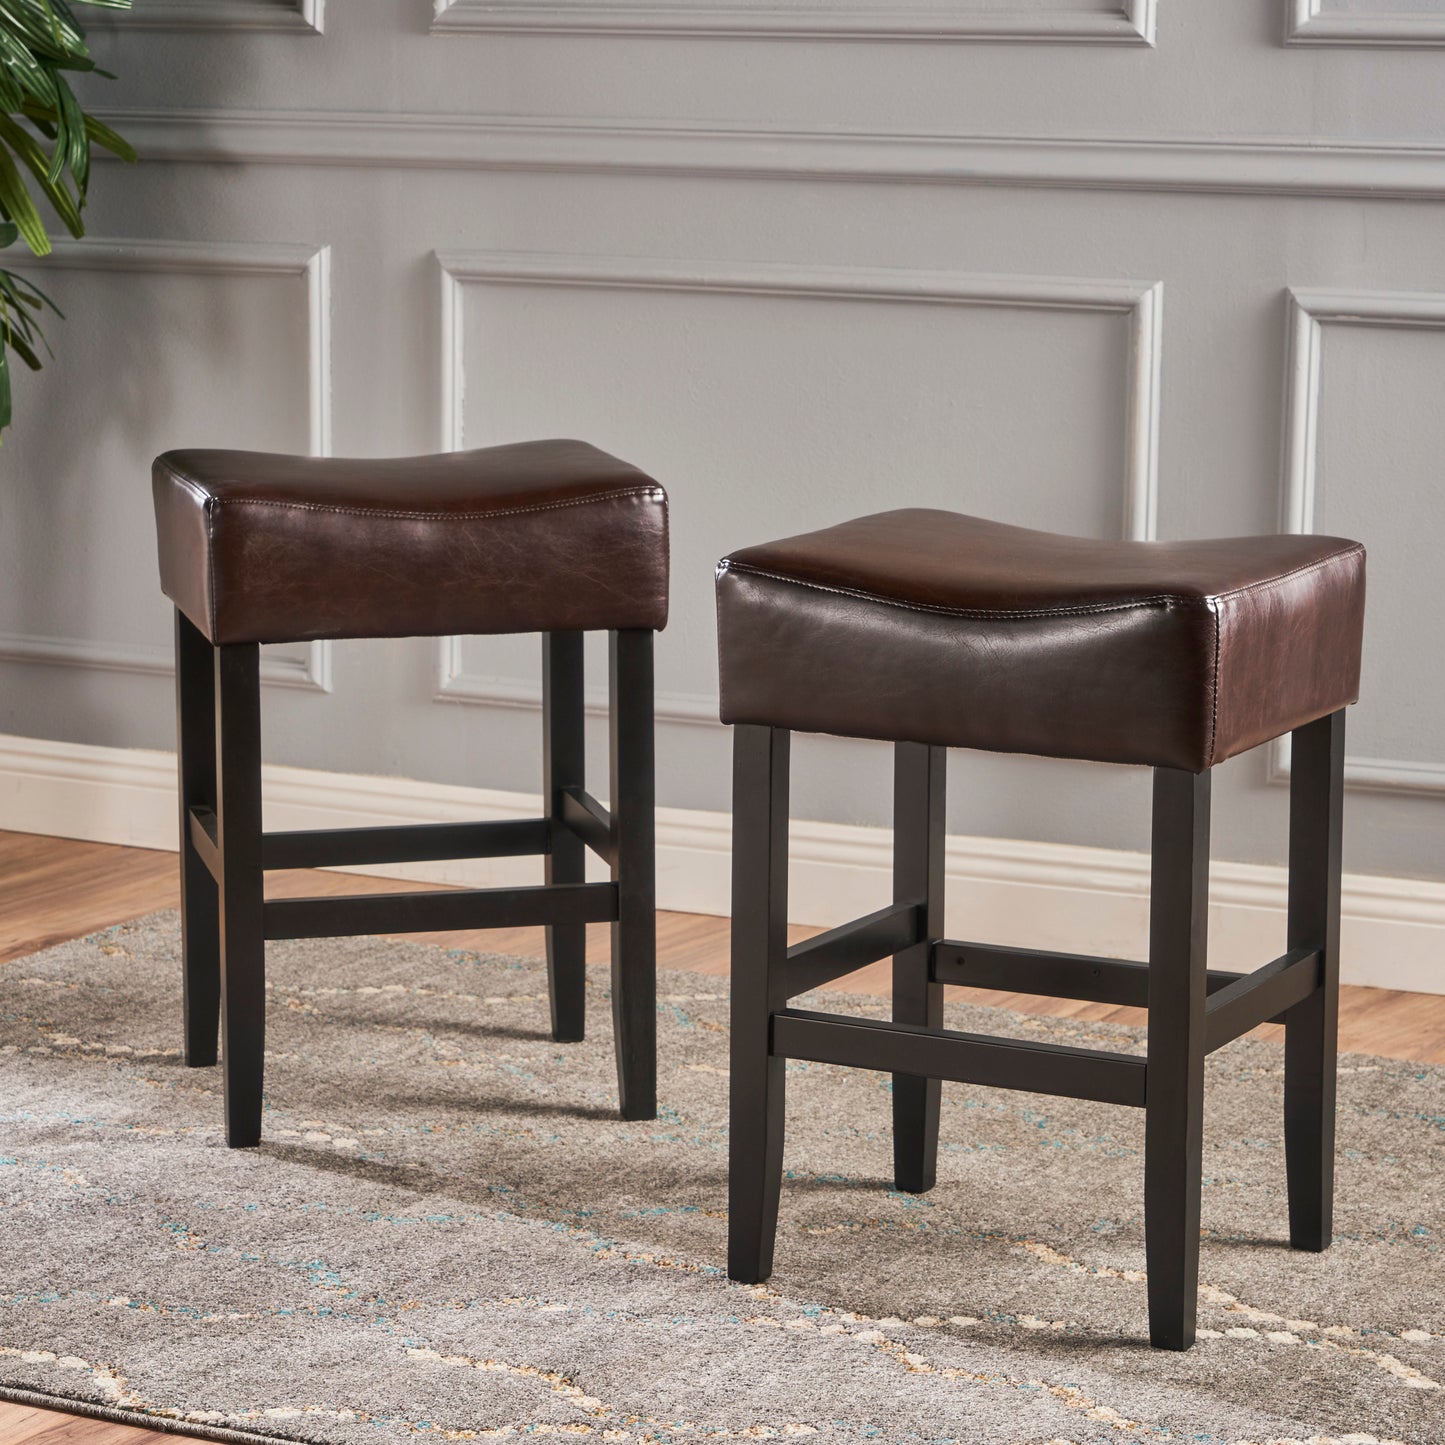 Adler 26-Inch Brown Leather Backless Counter Stool (Set of 2)